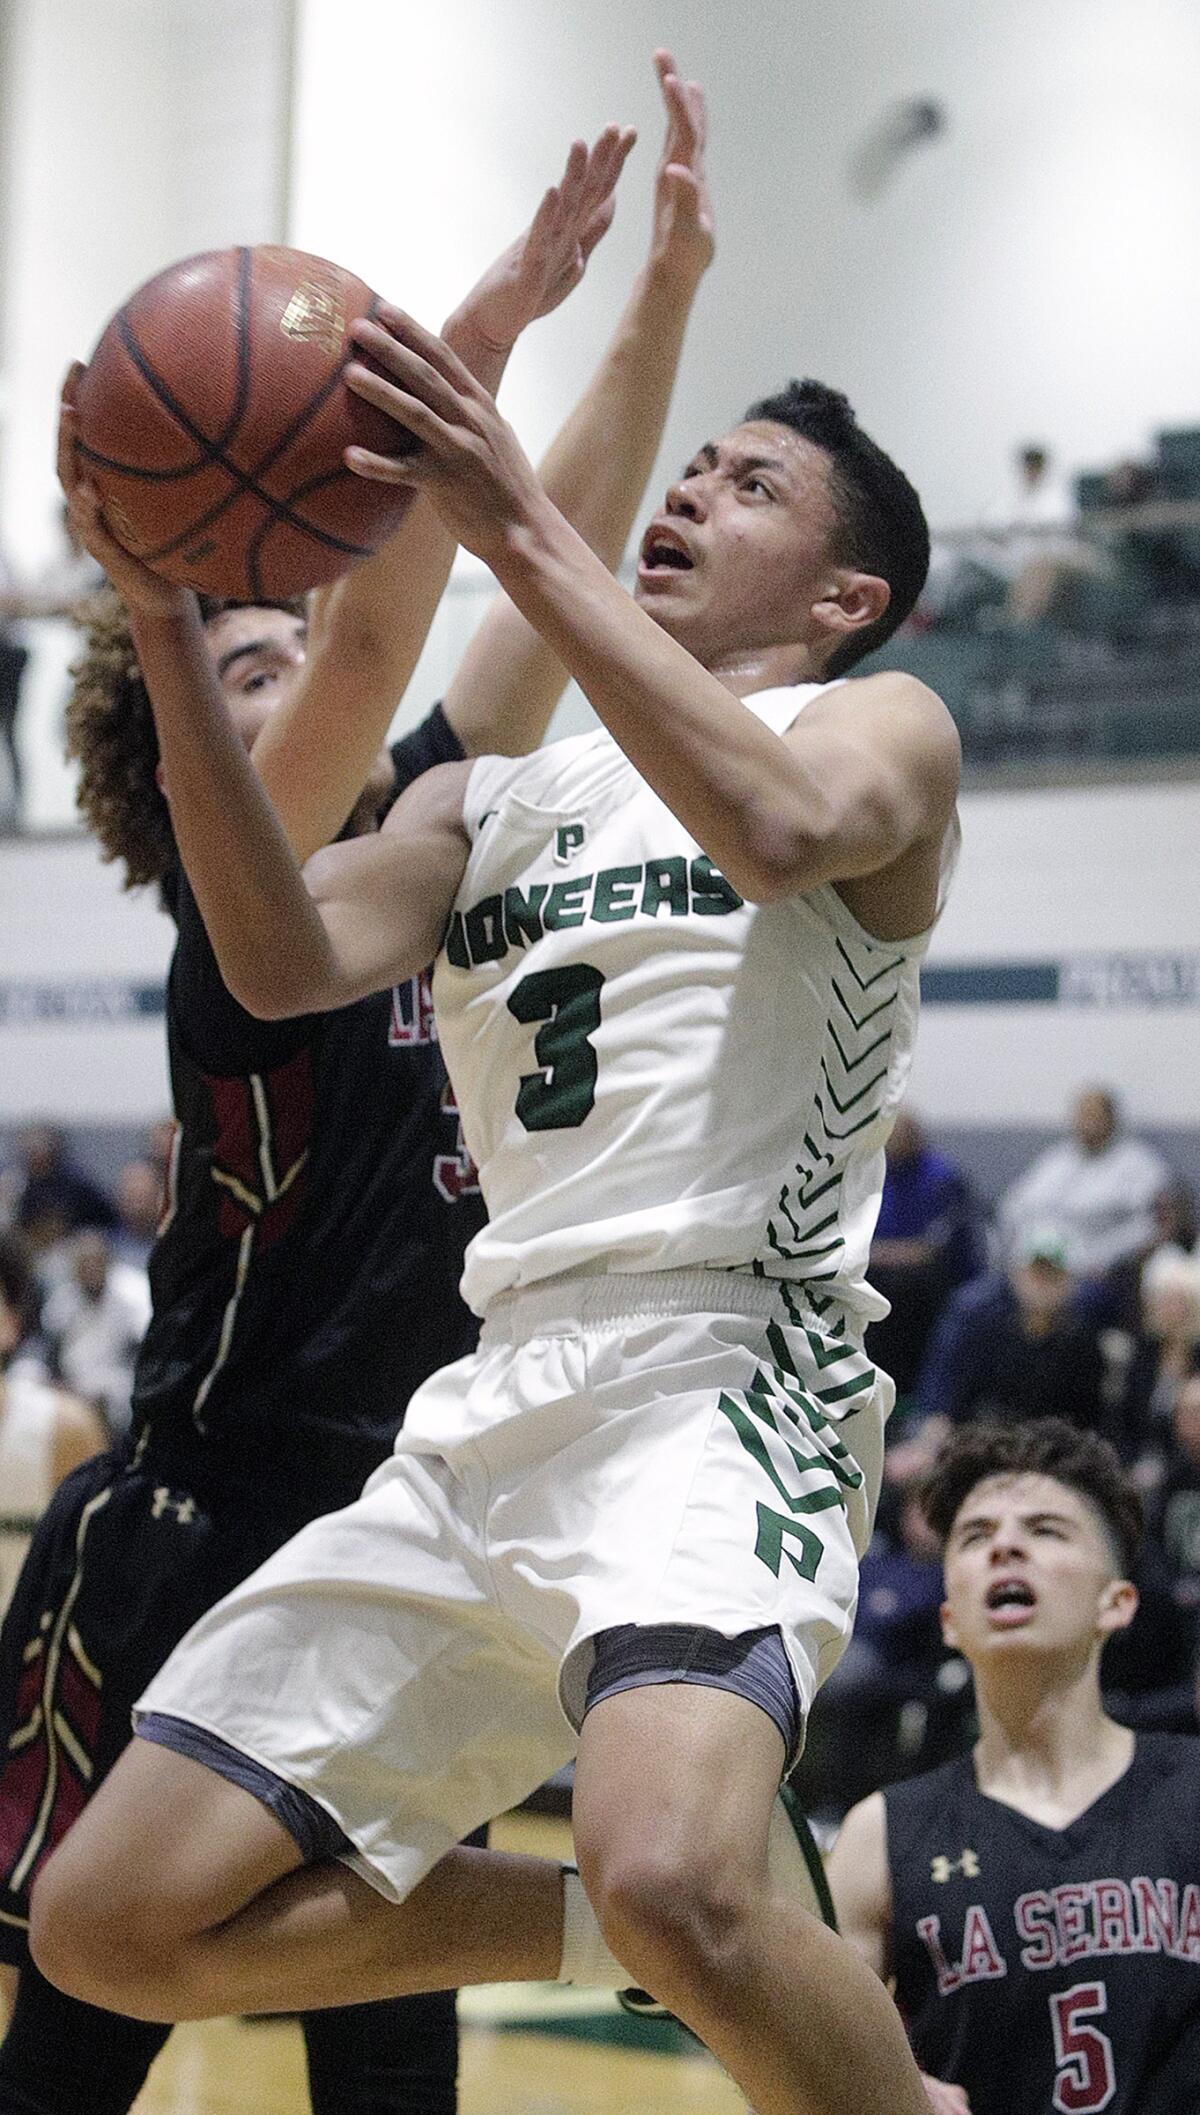 Providence's Bryce Whitaker holds in the air to shoot a layup against La Serna's MJ Aristegui in the CIF Southern Section Division III-AA quarterfinal boys' basketball playoff at Providence High School on Tuesday, February 18, 2020.